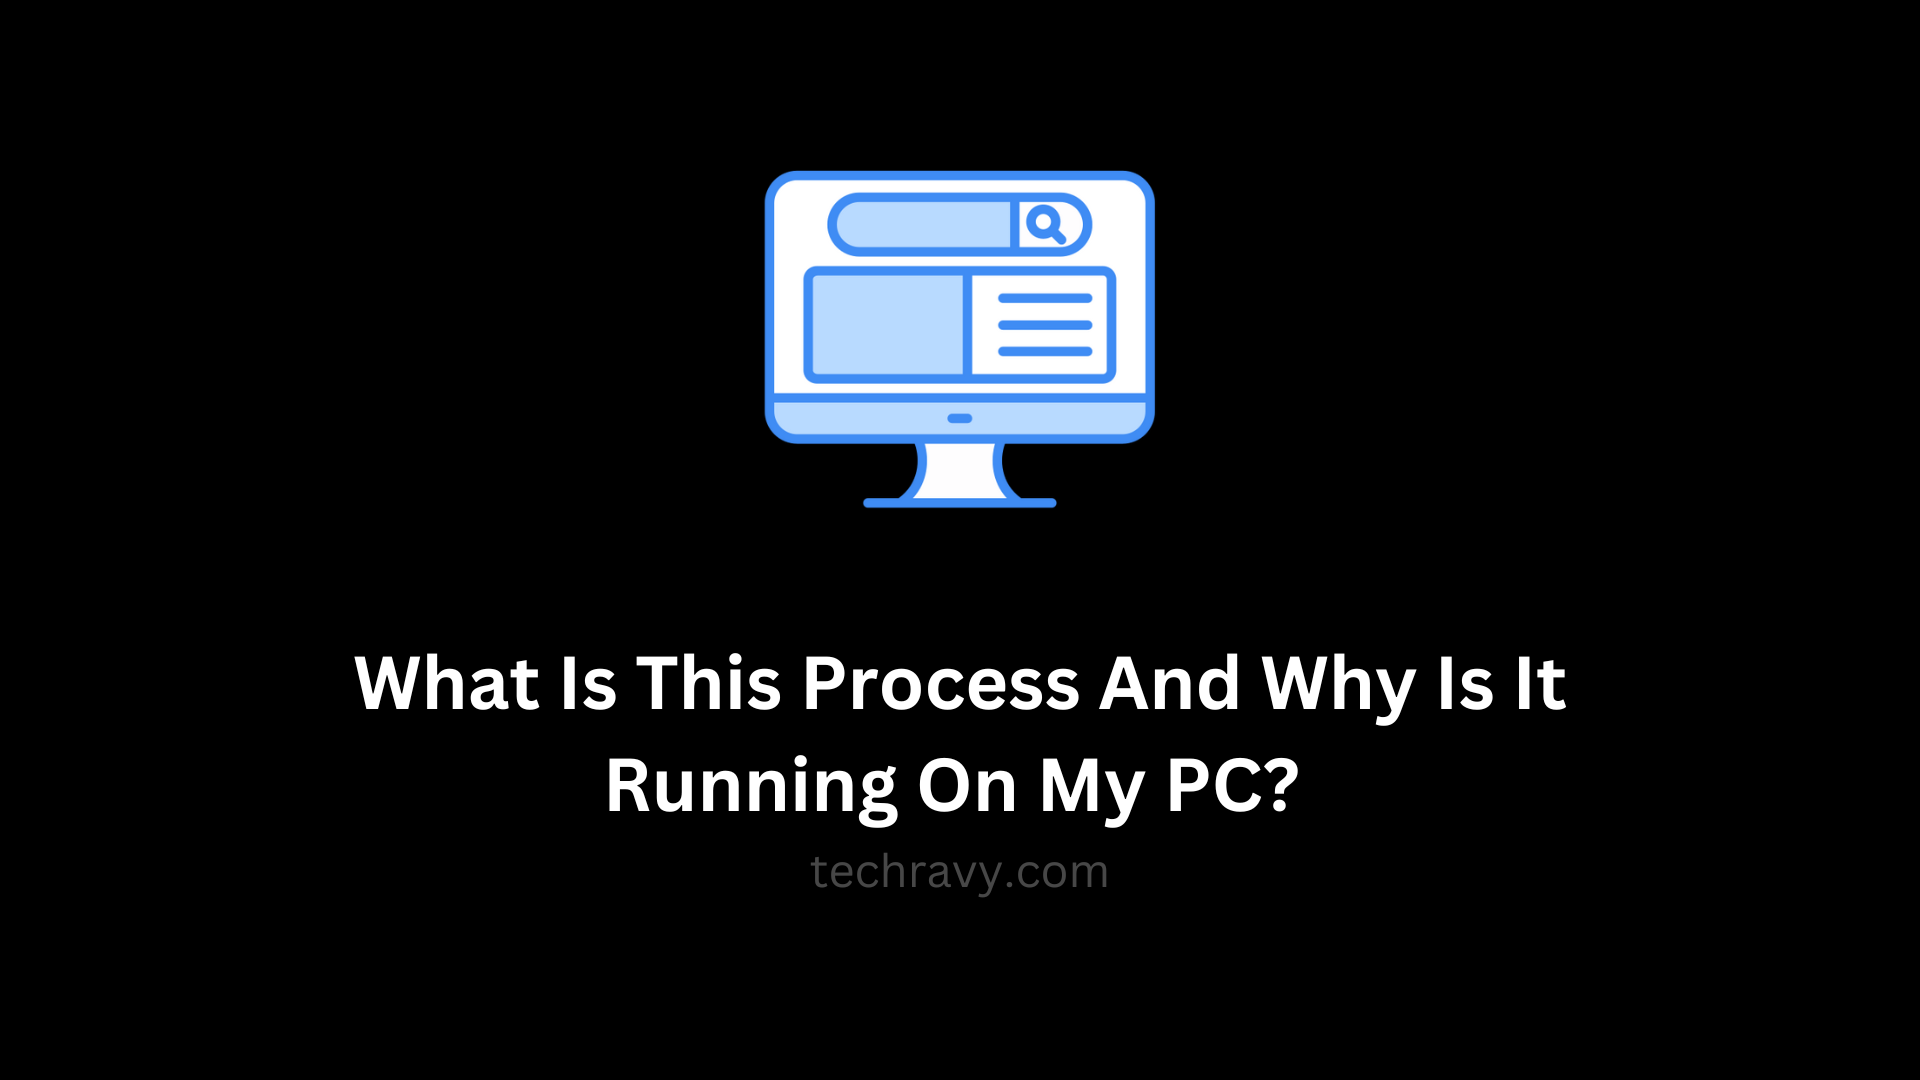 What Is This Process And Why Is It Running On My PC A Peek Inside Windows Task Manager!